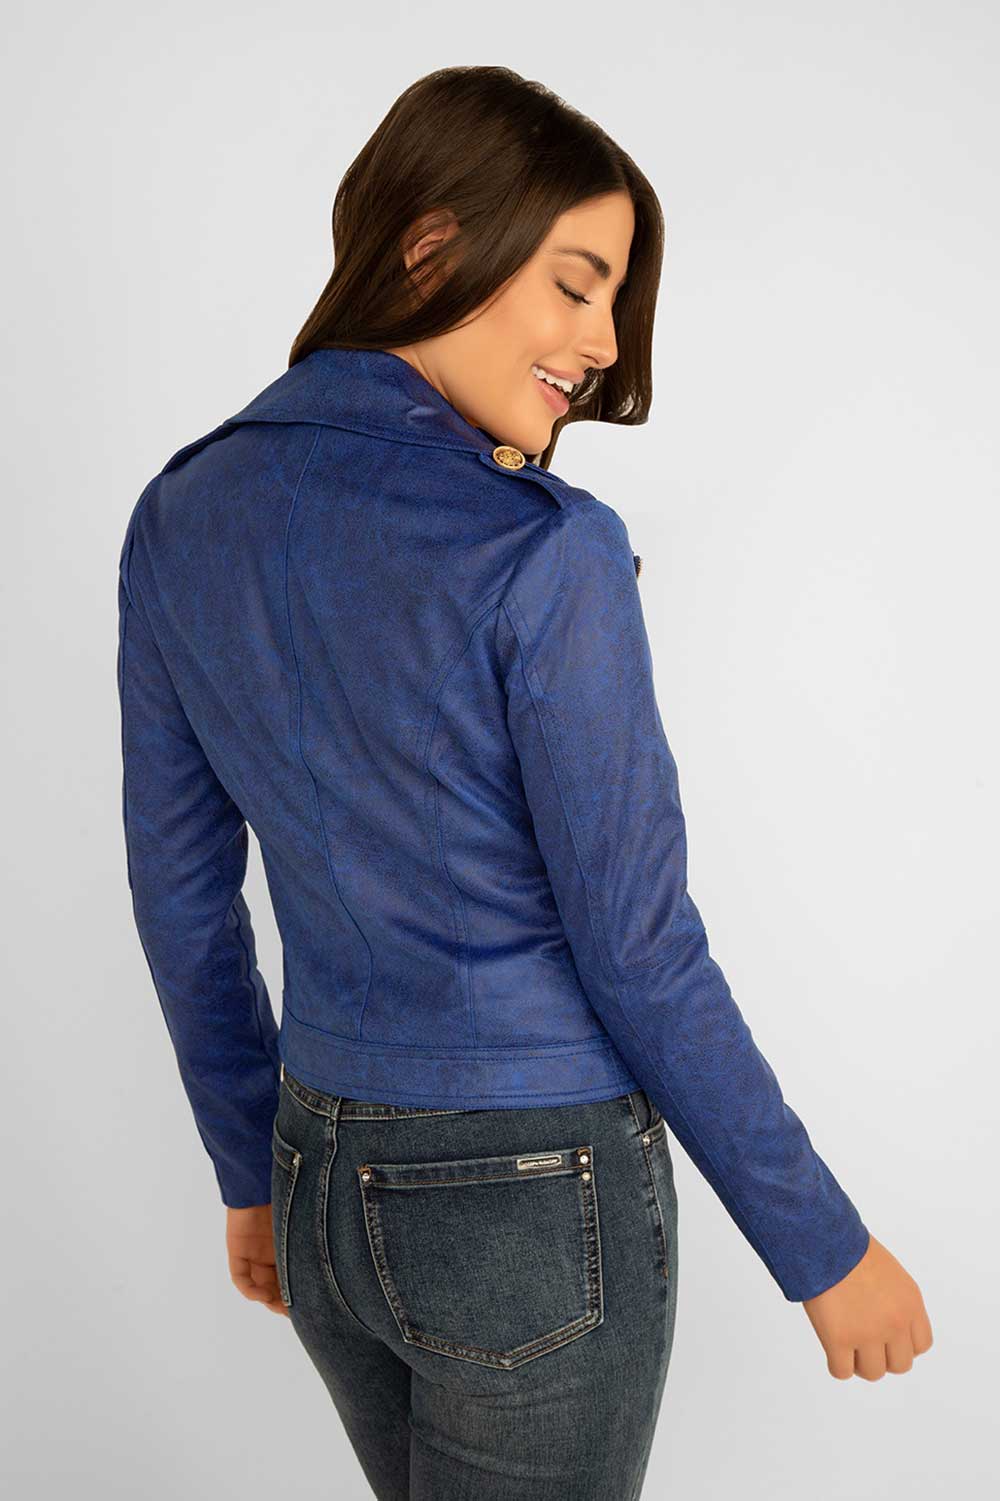 Women's Clothing FRANK LYMAN (233909U) Moto Jacket With Gold Buttons in ROYAL